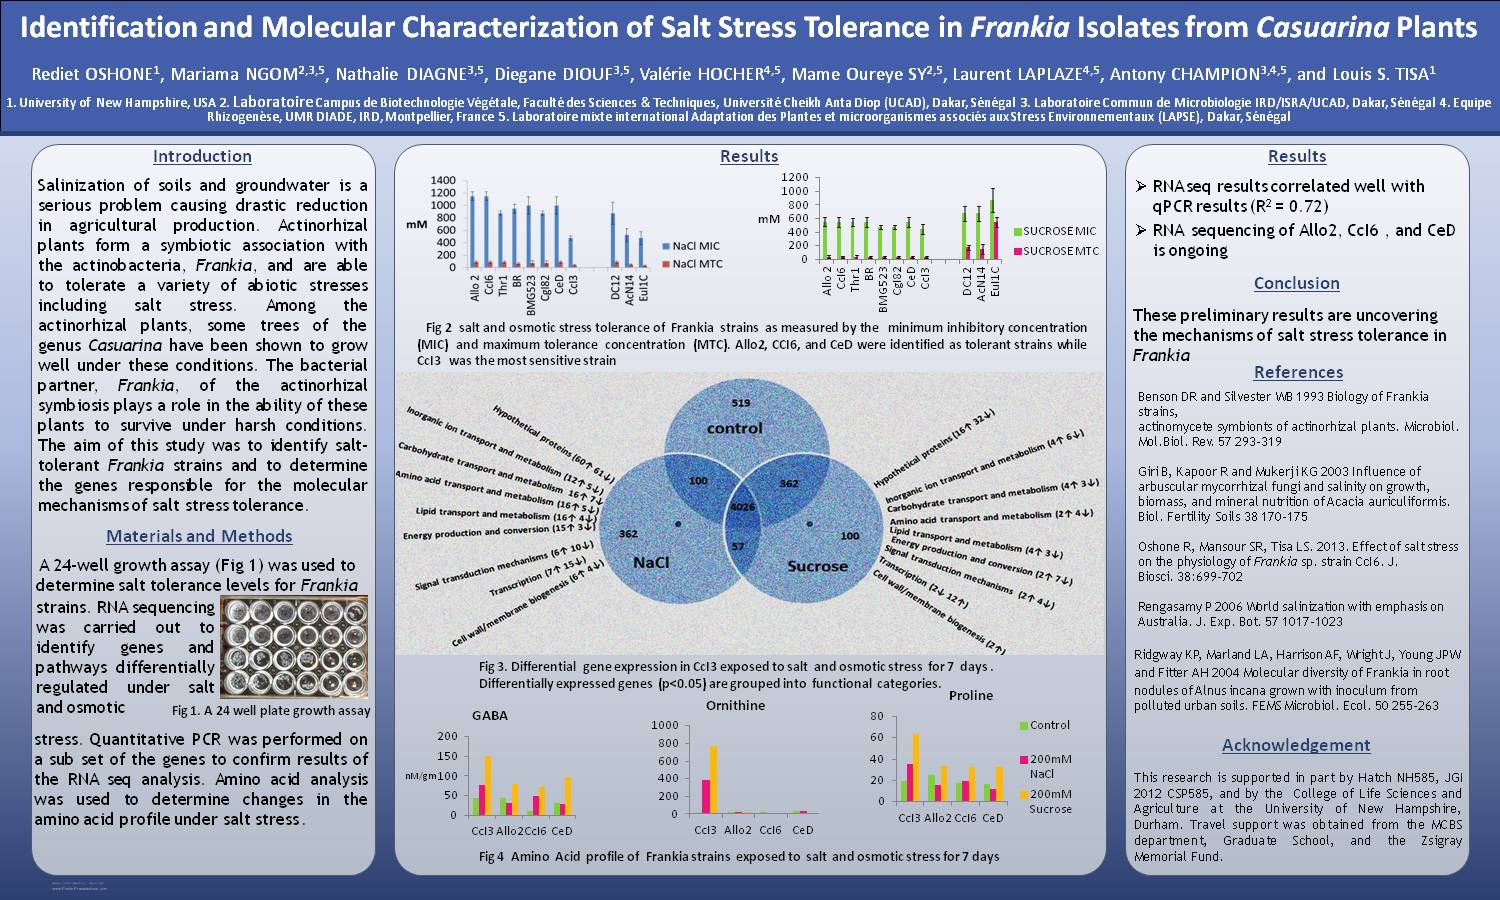 Identification And Molecular Characterization Of Salt Stress Tolerance In Frankia Isolates From Casuarina Plants by rts42